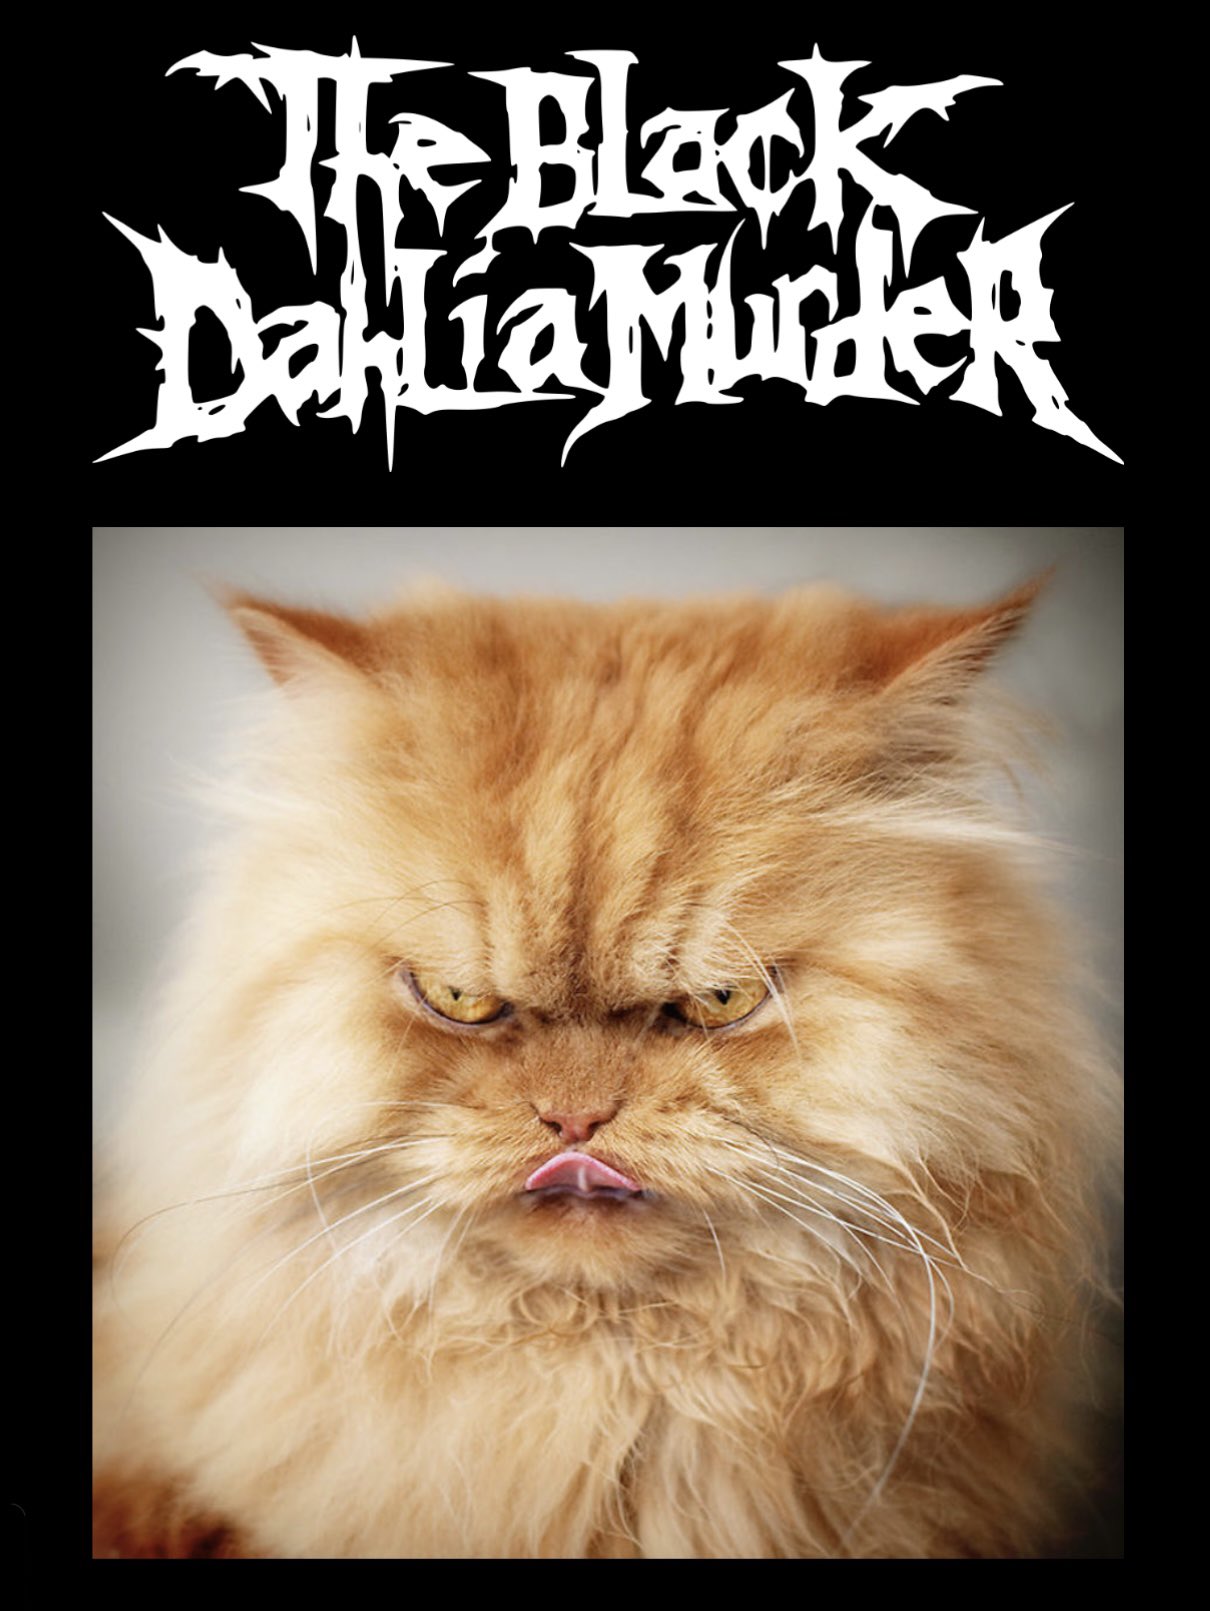 Metal Archives Has Replaced Every Band Photo With A Cat Photo